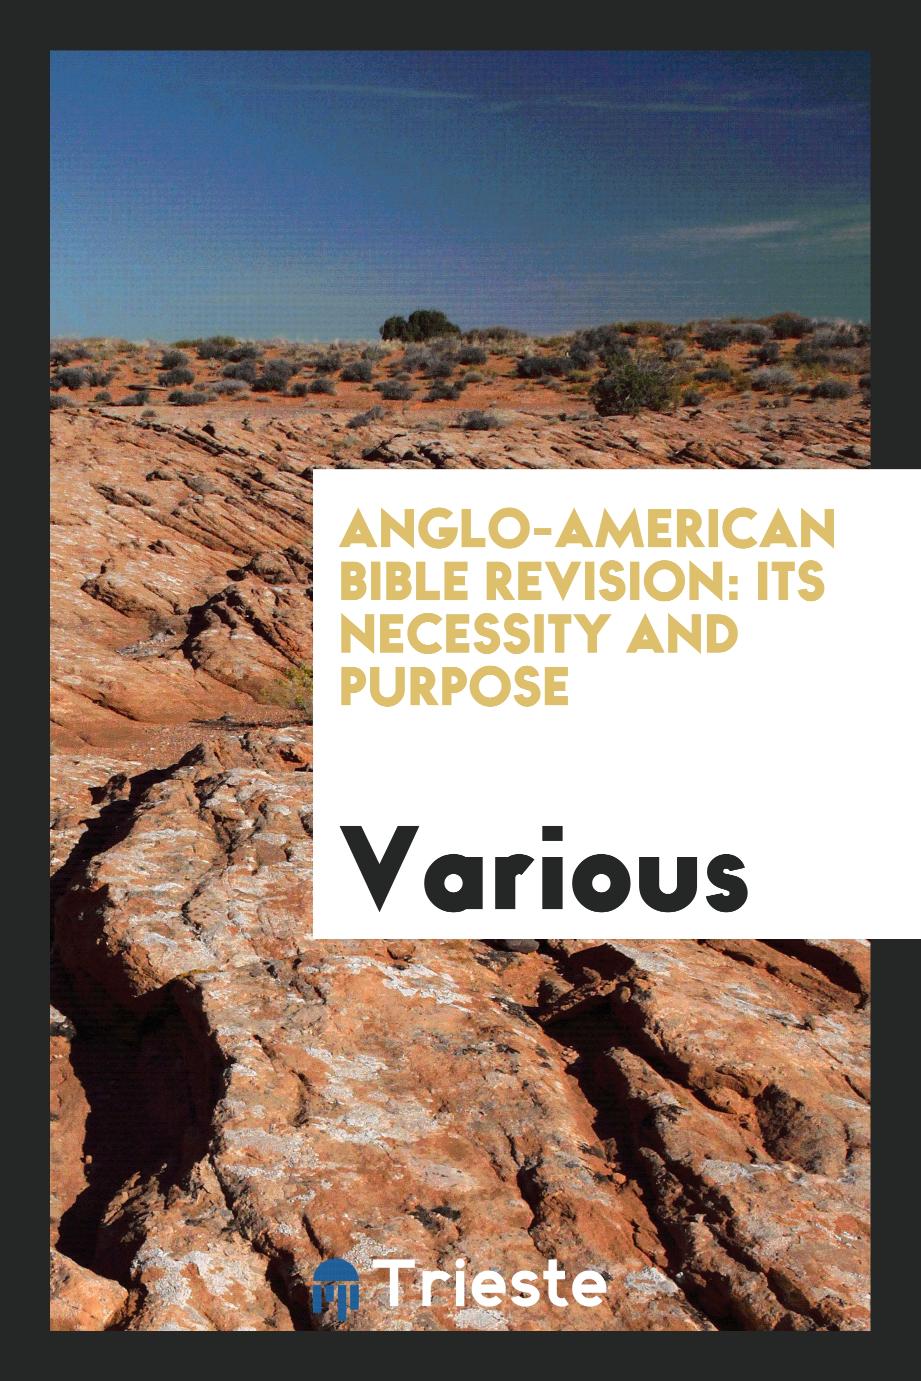 Anglo-American Bible revision: its necessity and purpose